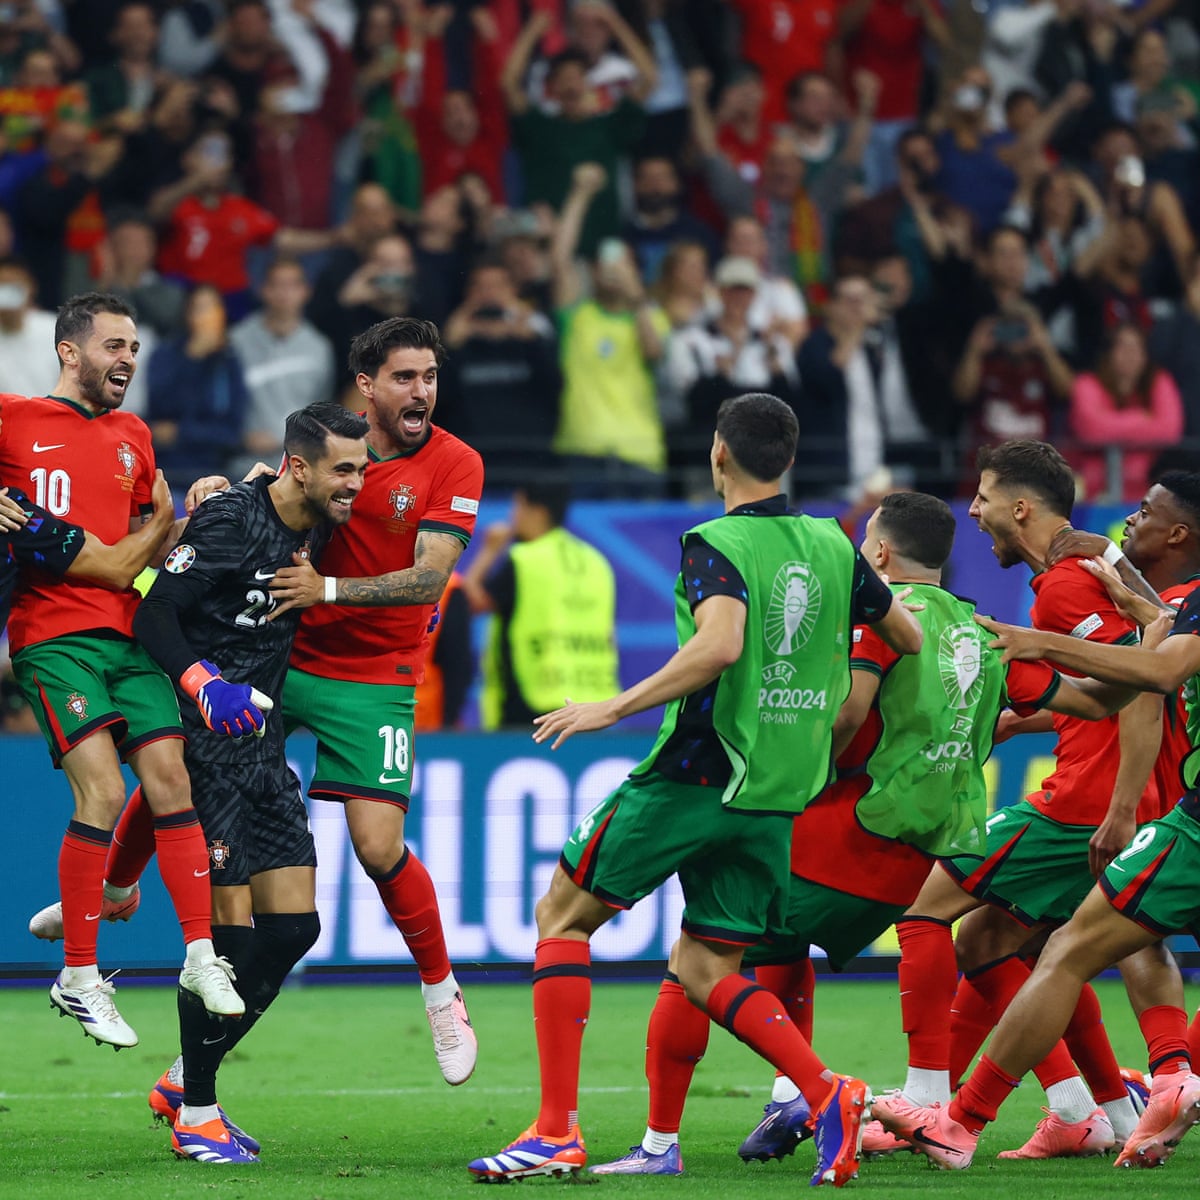 Portugal eliminate Slovenia on penalties to set up France clash in quarter-finals